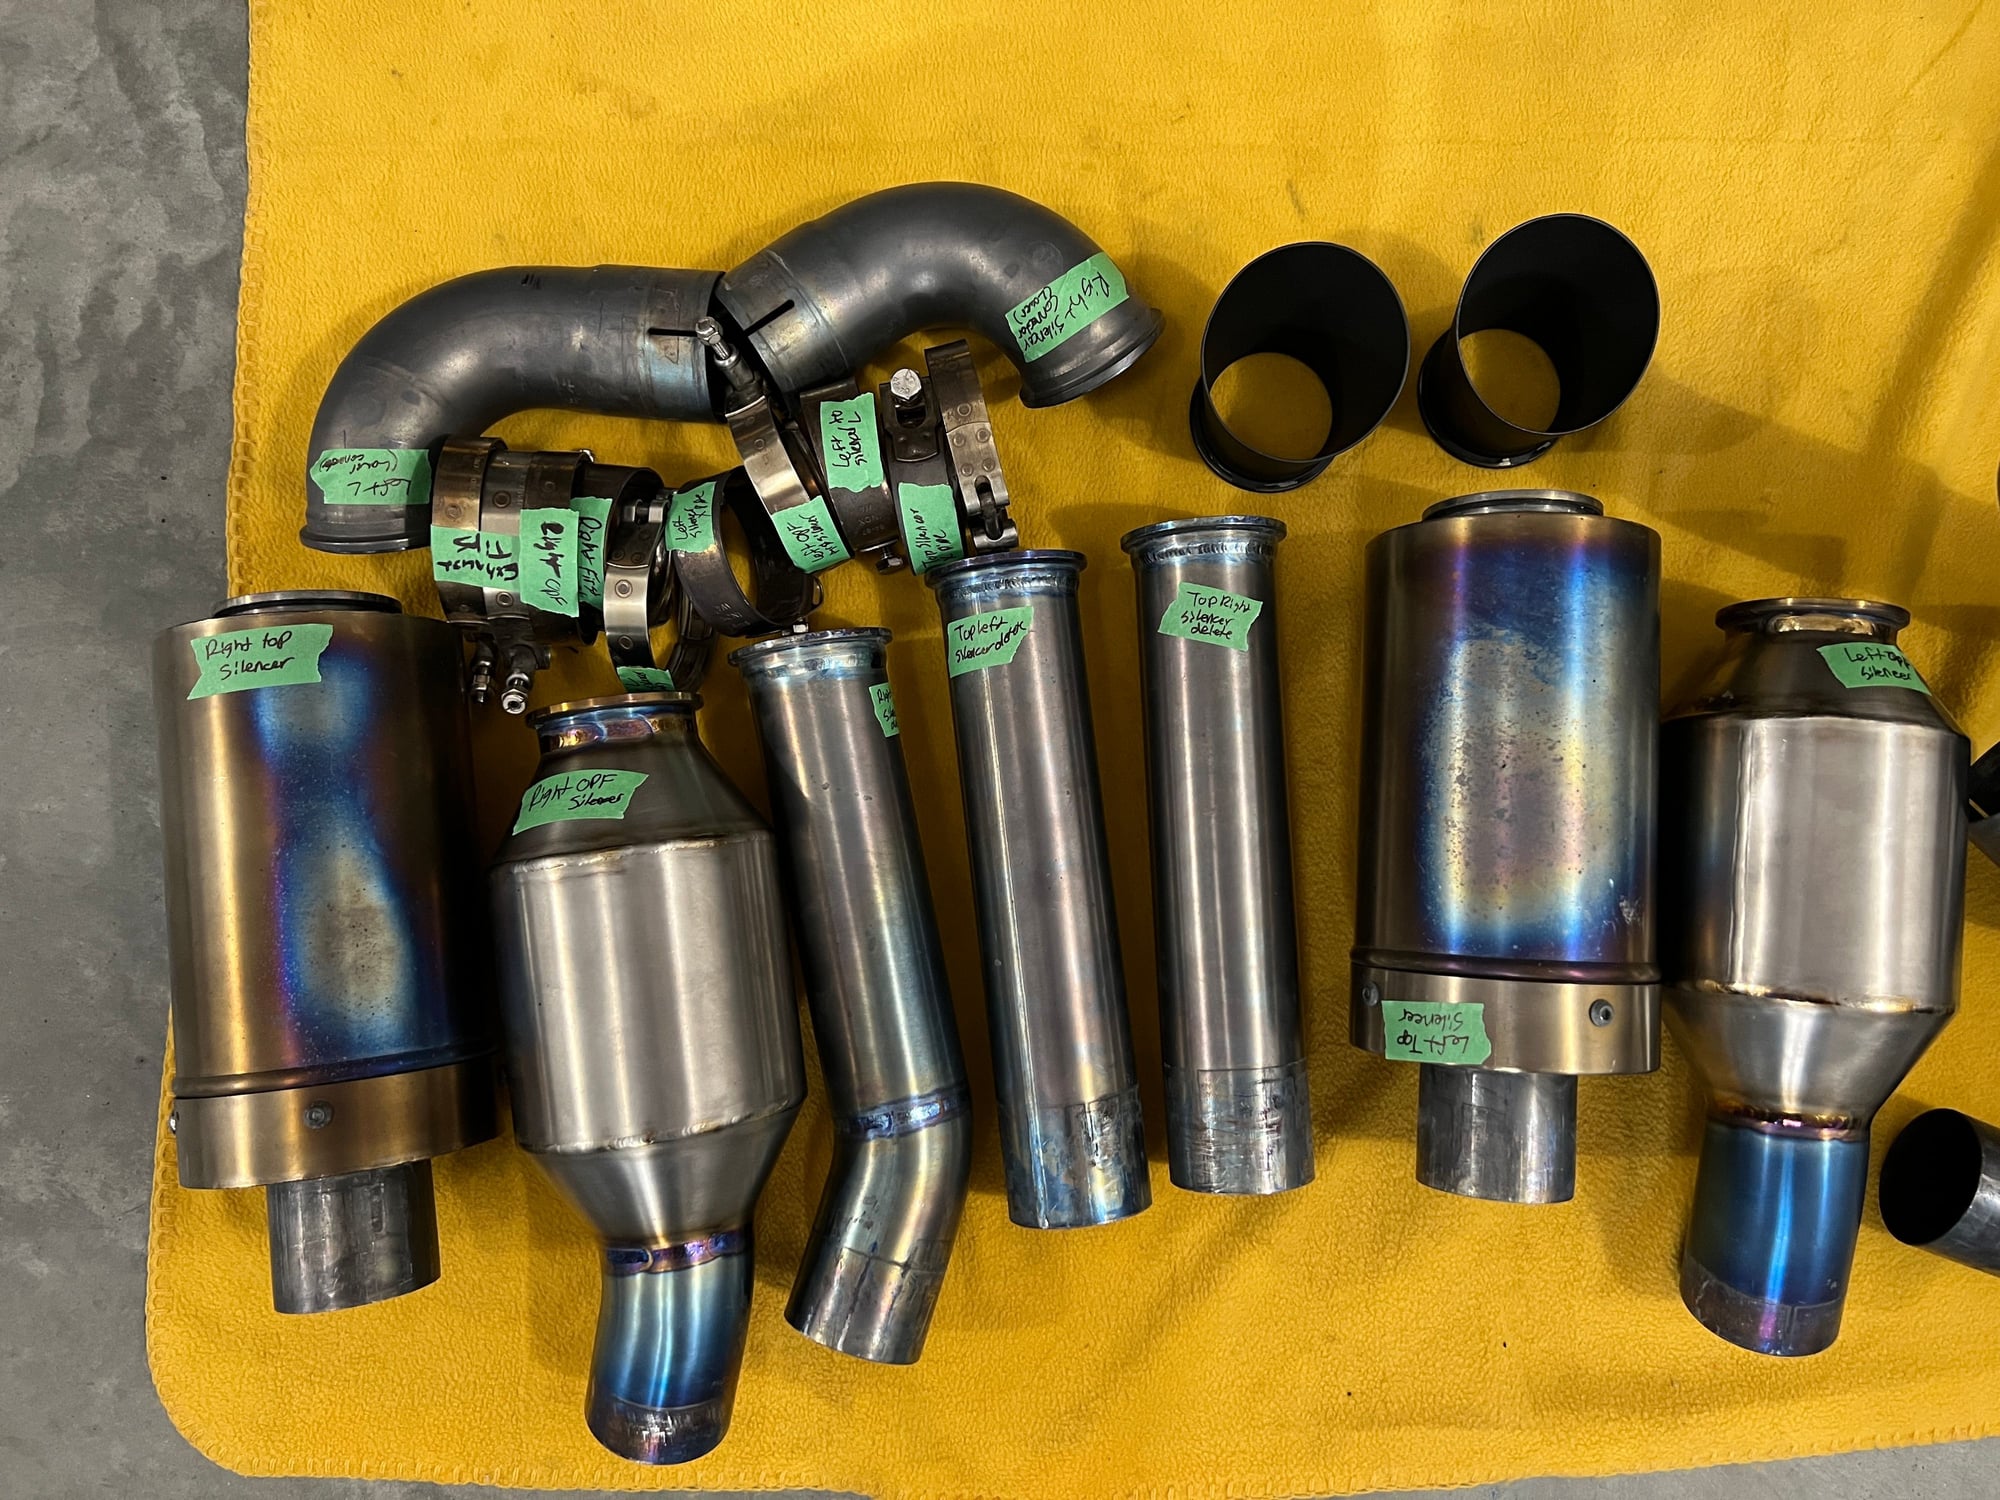 Engine - Exhaust - 718 GT4 Spyder GTS JCR TITANIUM SUPERLIGHT RACE PIPE (SILENCED) and non silenced - Used - 2020 to 2022 Porsche 718 Boxster - 2020 to 2022 Porsche 718 Cayman - 2020 to 2022 Porsche 718 Spyder - 2020 to 2022 Porsche 718 - Dakota Dunes, SD 57049, United States